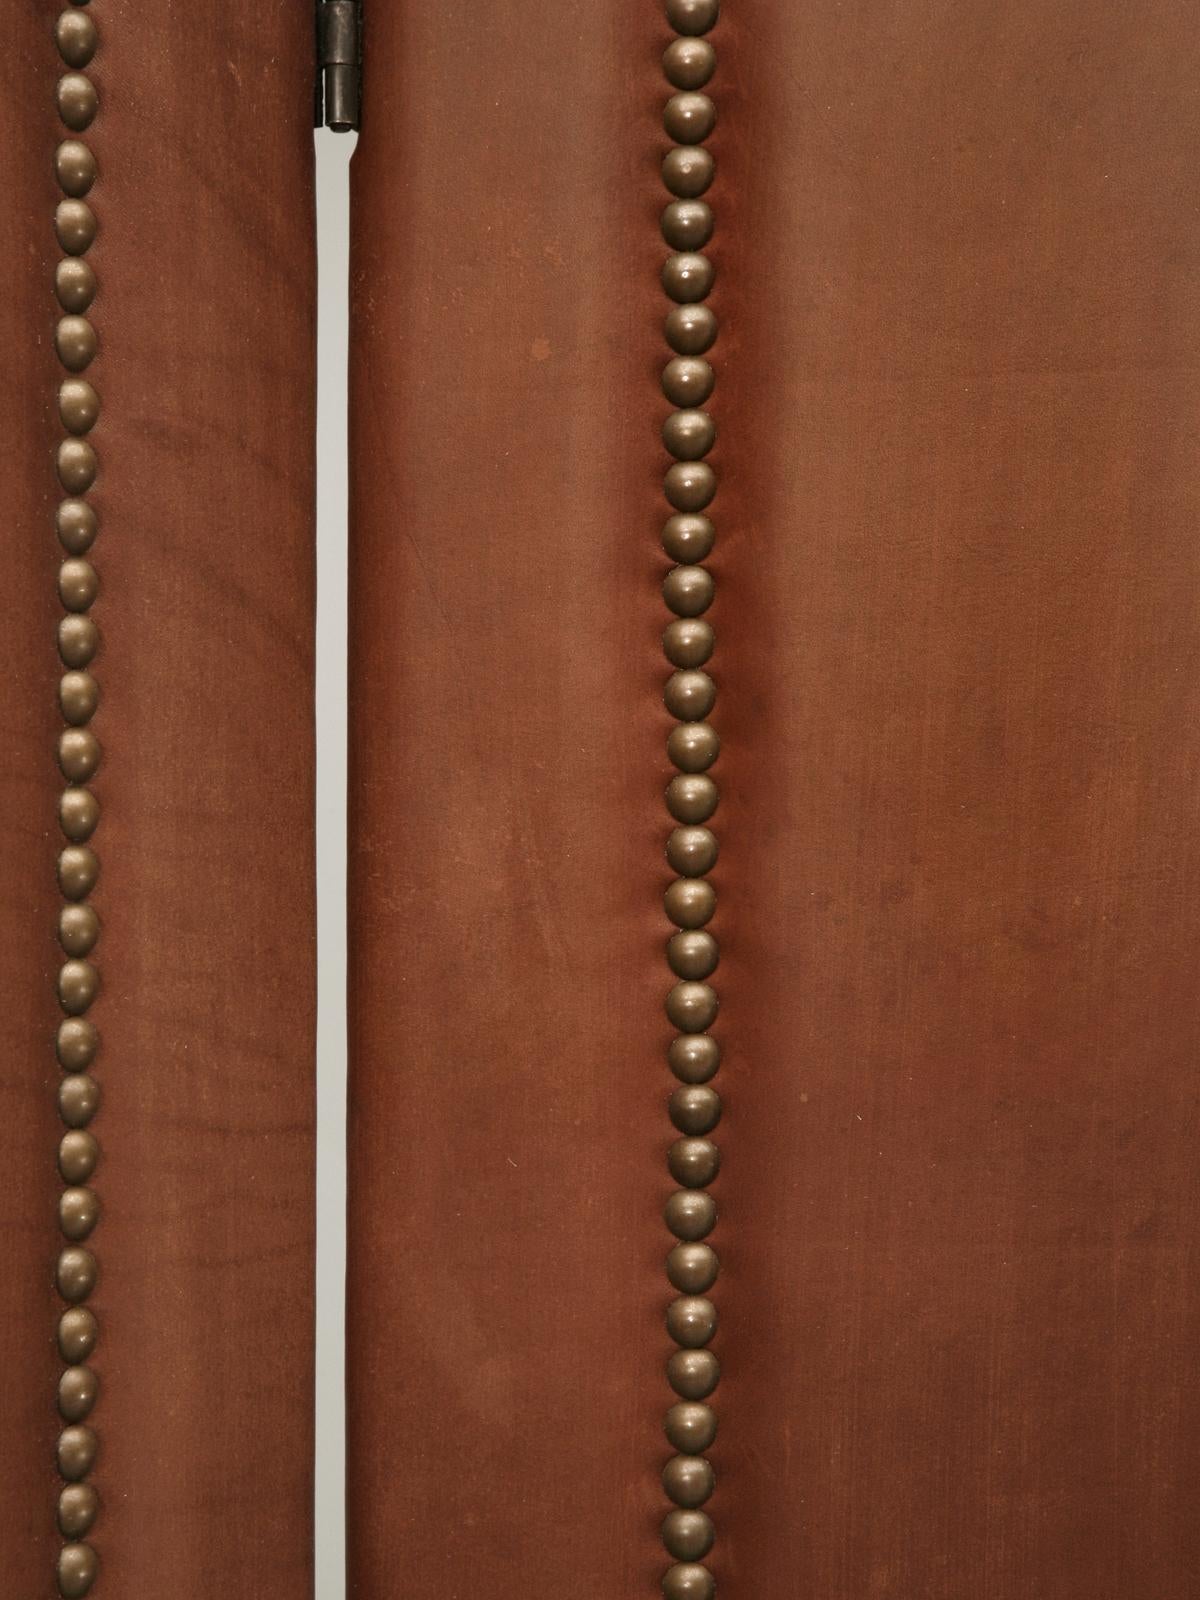 Hand-Crafted Leather Four-Panel Folding Screen or Room Divider with Bronze Nails Very Heavy For Sale